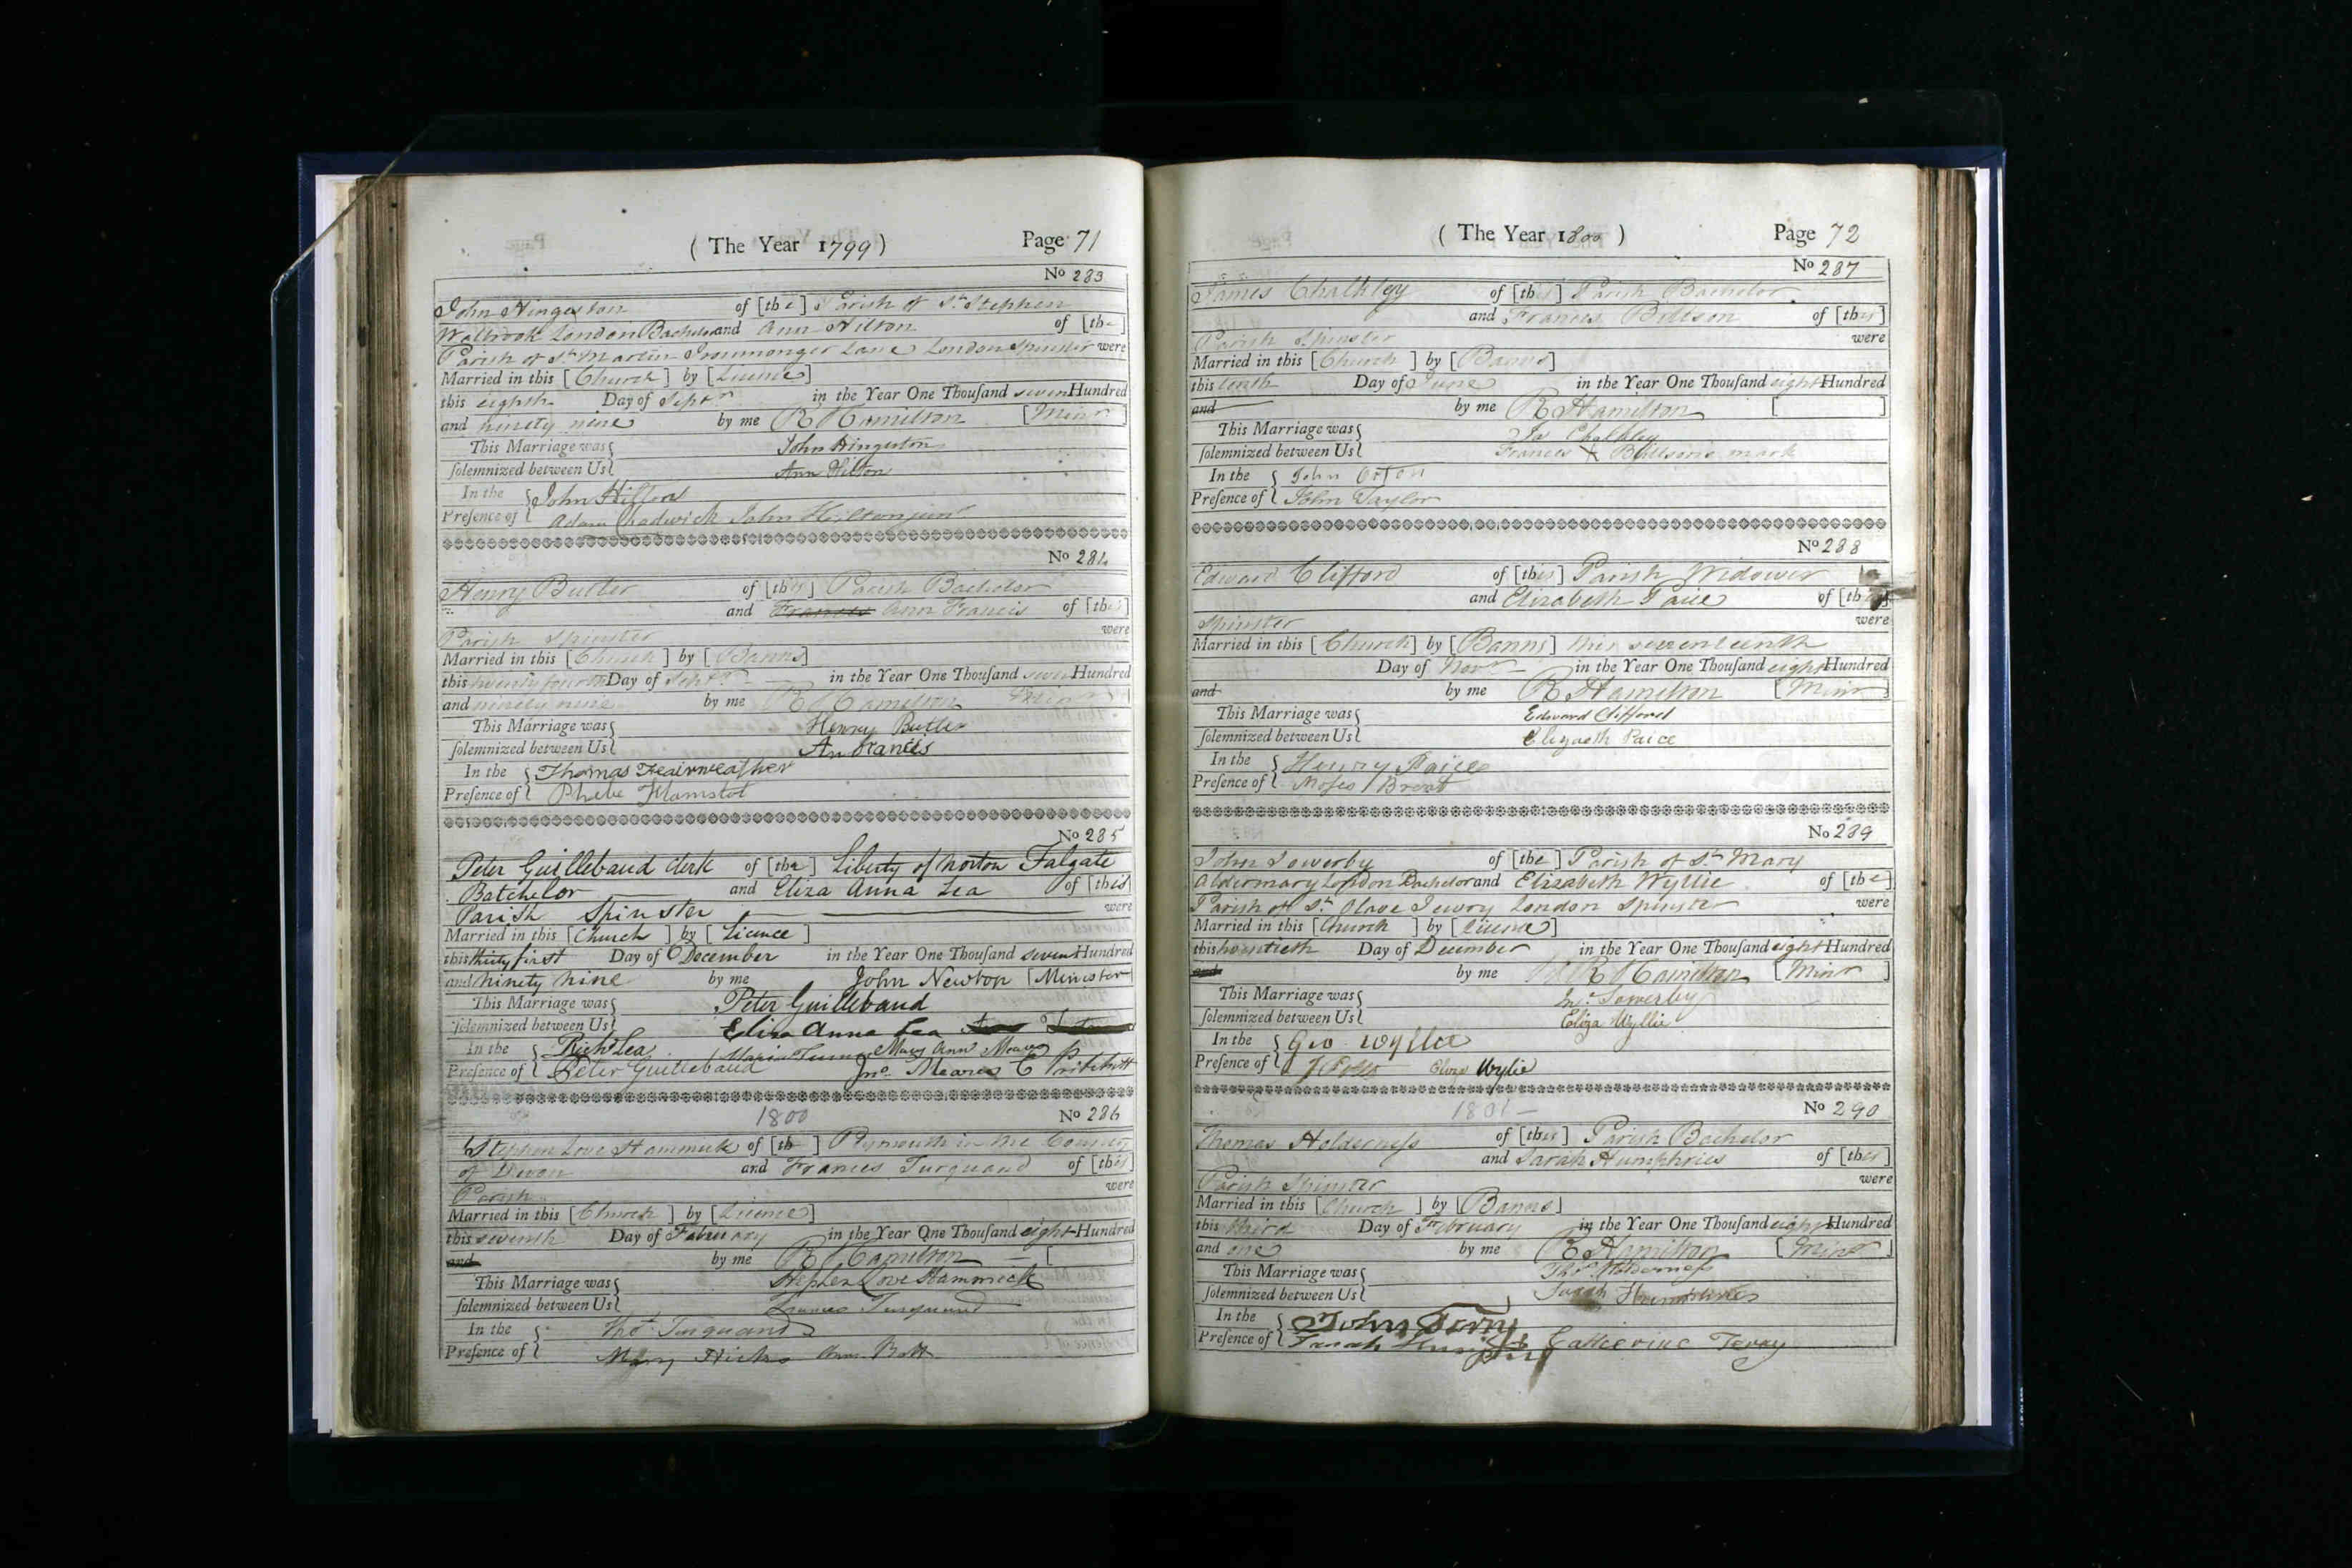 1799 marriage of Eliza Anna Lea to Peter Guillebaud